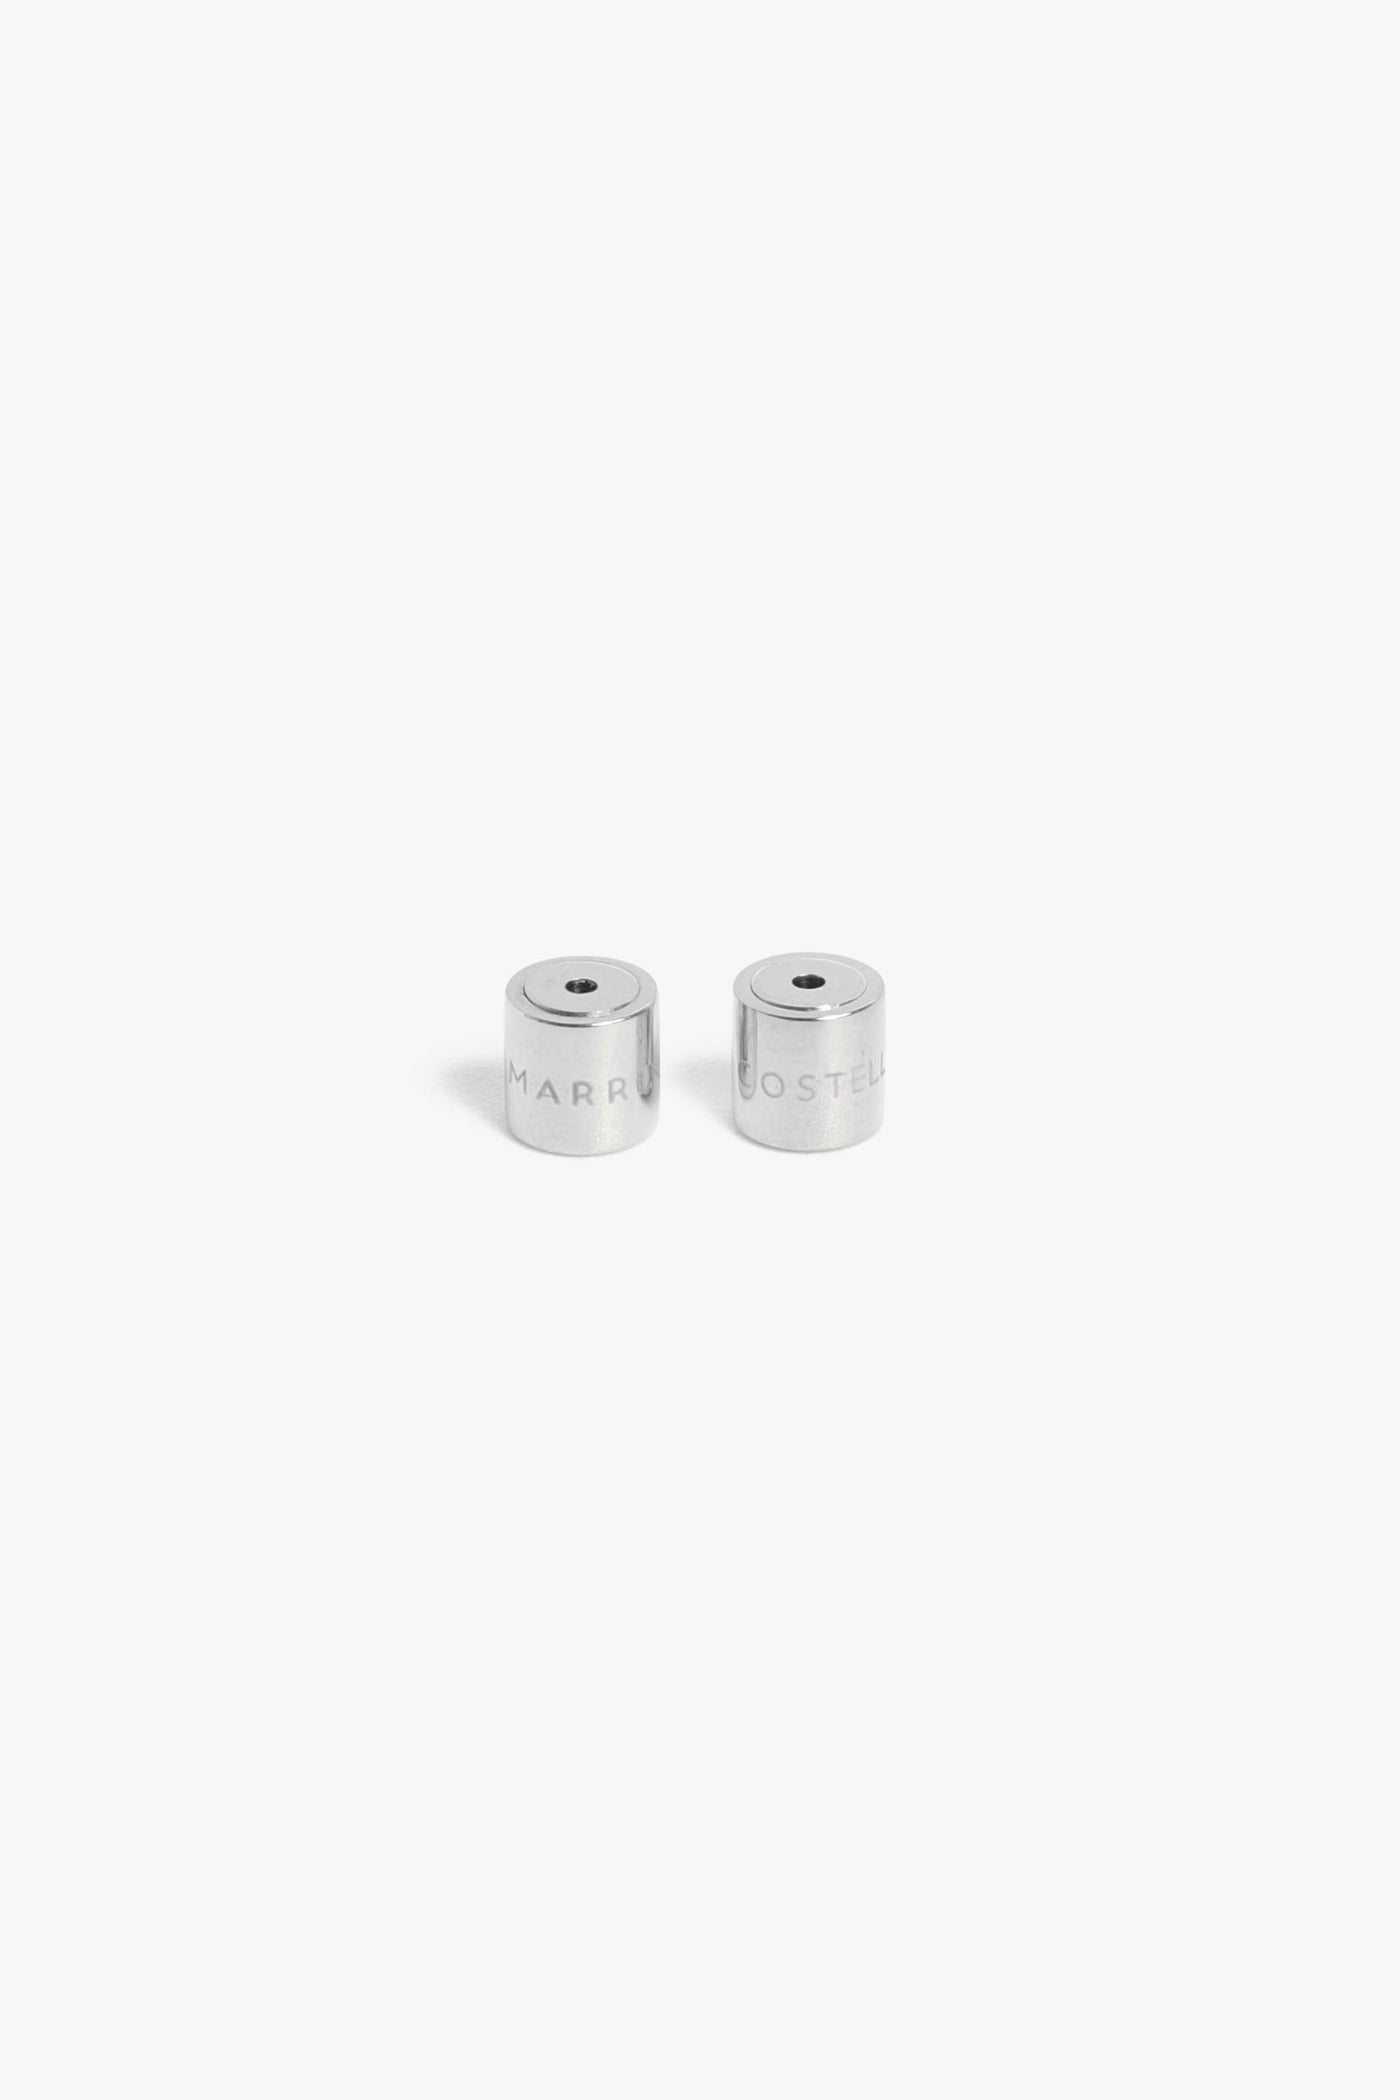 Marrin Costello Jewelry custom earring backings. Cylindrical shaped, for extra comfort and security. Polished stainless steel. 